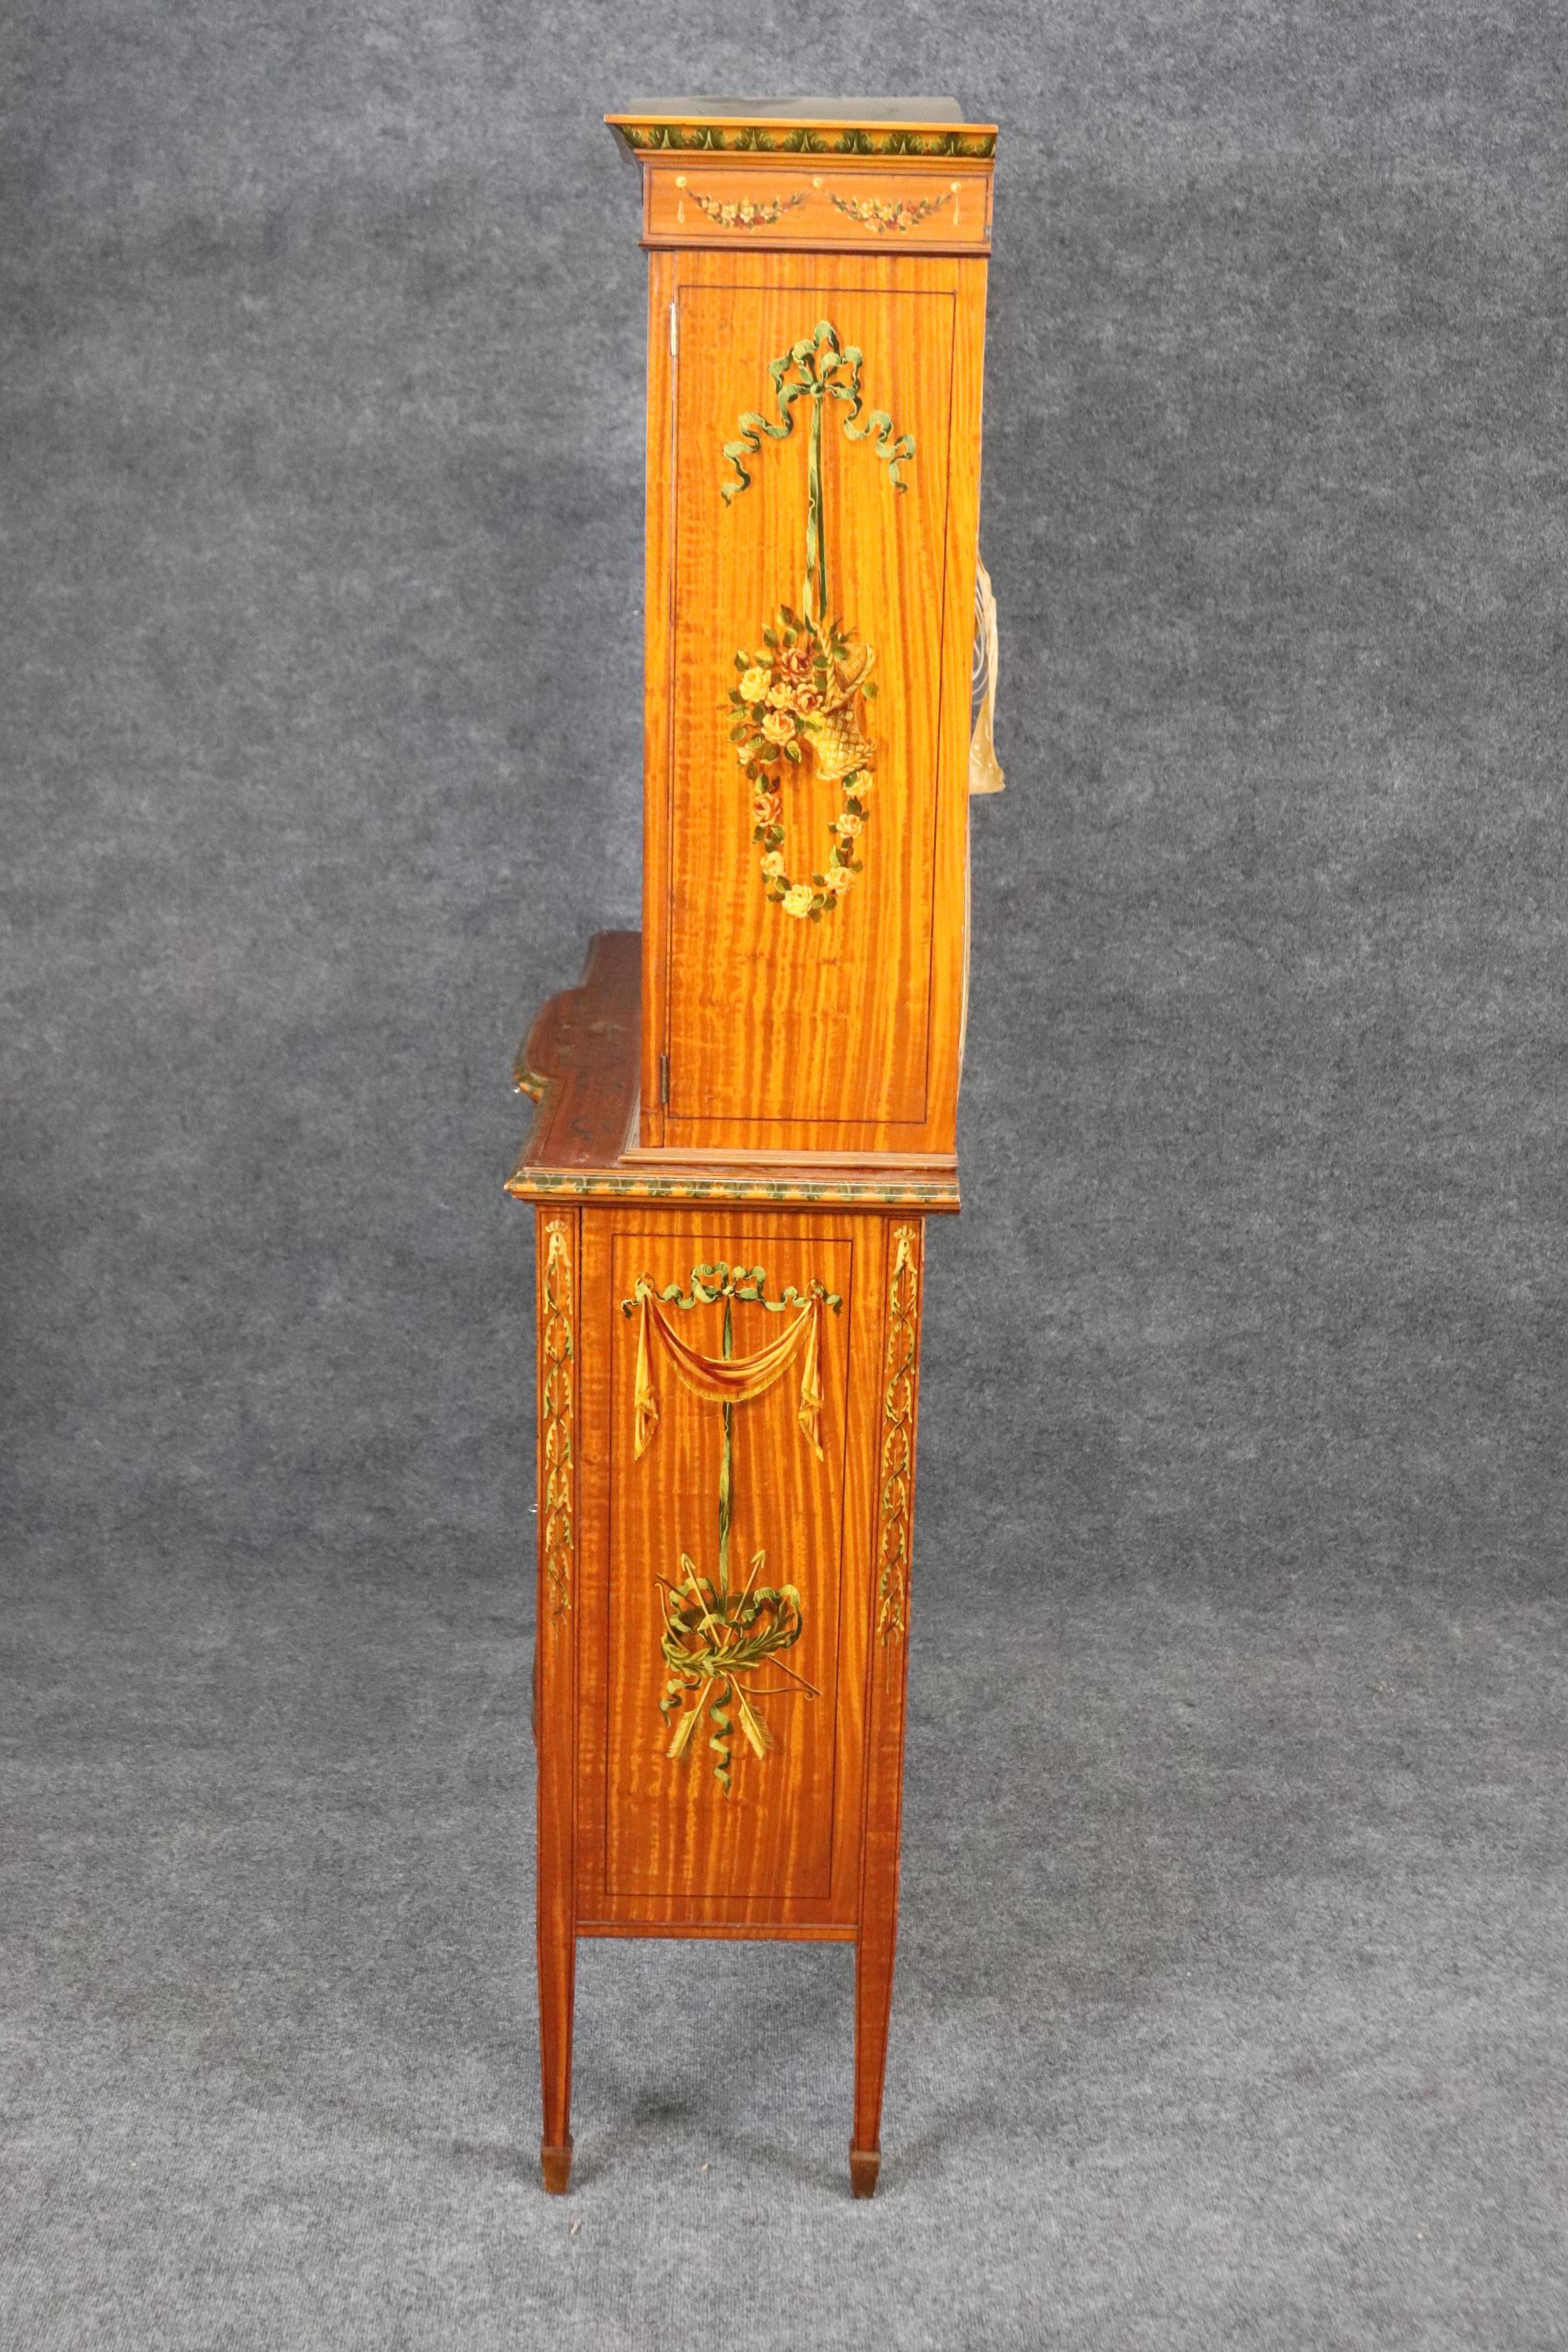 Rare Satinwood Vernis Martin Paint Decorated Adams Style Vitrine China Cabinet For Sale 1